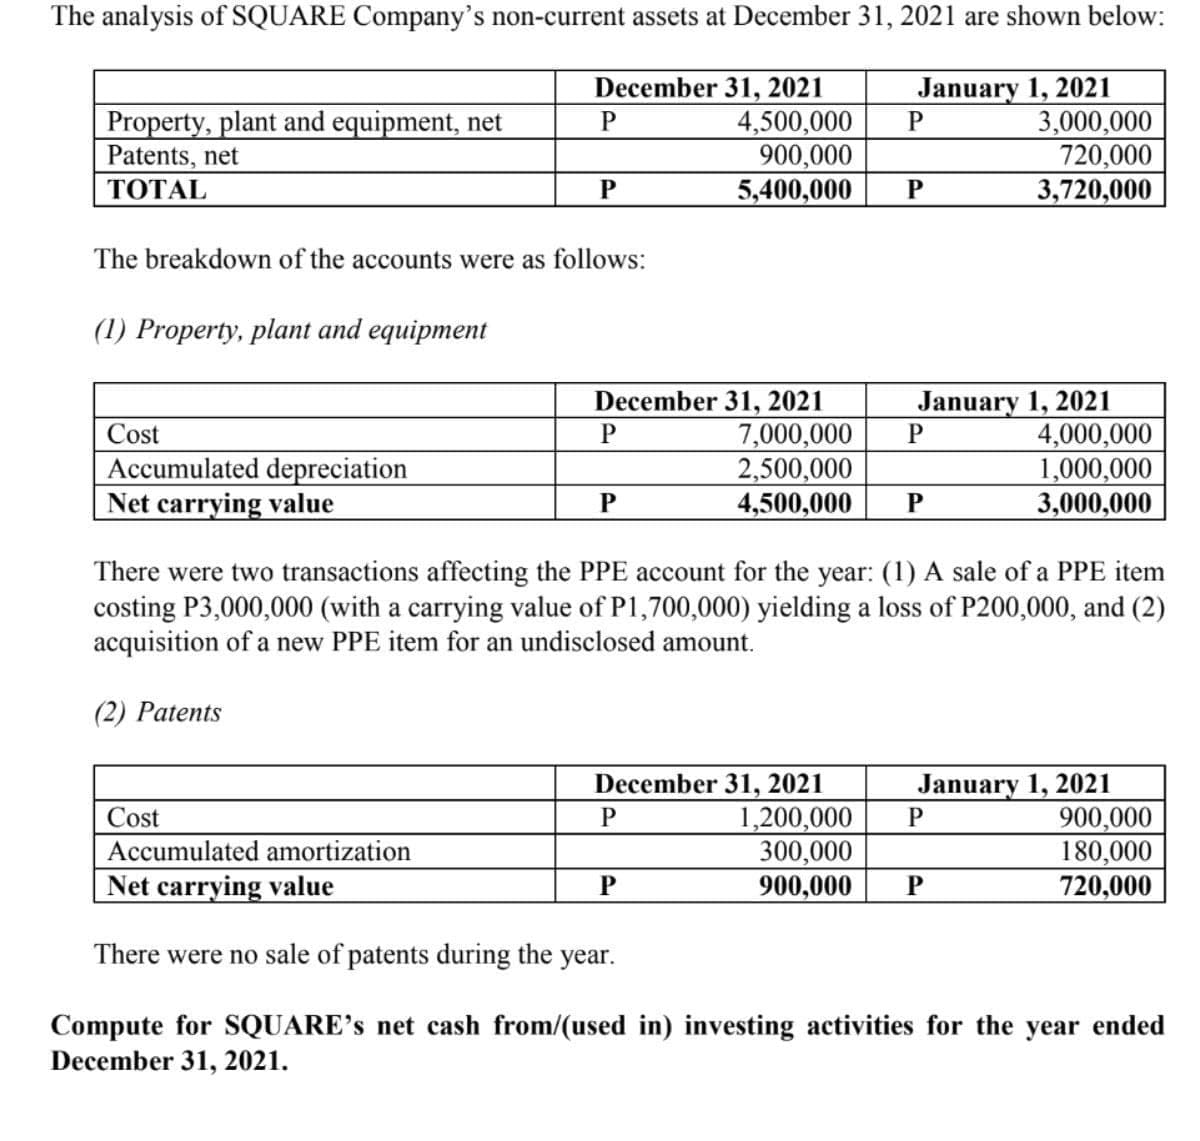 The analysis of SQUARE Company's non-current assets at December 31, 2021 are shown below:
December 31, 2021
4,500,000
900,000
5,400,000
January 1, 2021
3,000,000
720,000
3,720,000
Property, plant and equipment, net
Patents, net
P
ТОTAL
P
P
The breakdown of the accounts were as follows:
(1) Property, plant and equipment
December 31, 2021
7,000,000
2,500,000
4,500,000
January 1, 2021
4,000,000
1,000,000
3,000,000
Cost
Accumulated depreciation
Net carrying value
P
P
There were two transactions affecting the PPE account for the year: (1) A sale of a PPE item
costing P3,000,000 (with a carrying value of P1,700,000) yielding a loss of P200,000, and (2)
acquisition of a new PPE item for an undisclosed amount.
(2) Patents
December 31, 2021
1,200,000
300,000
900,000
January 1, 2021
900,000
180,000
720,000
Cost
Accumulated amortization
Net carrying value
There were no sale of patents during the year.
Compute for SQUARE's net cash from/(used in) investing activities for the year ended
December 31, 2021.
